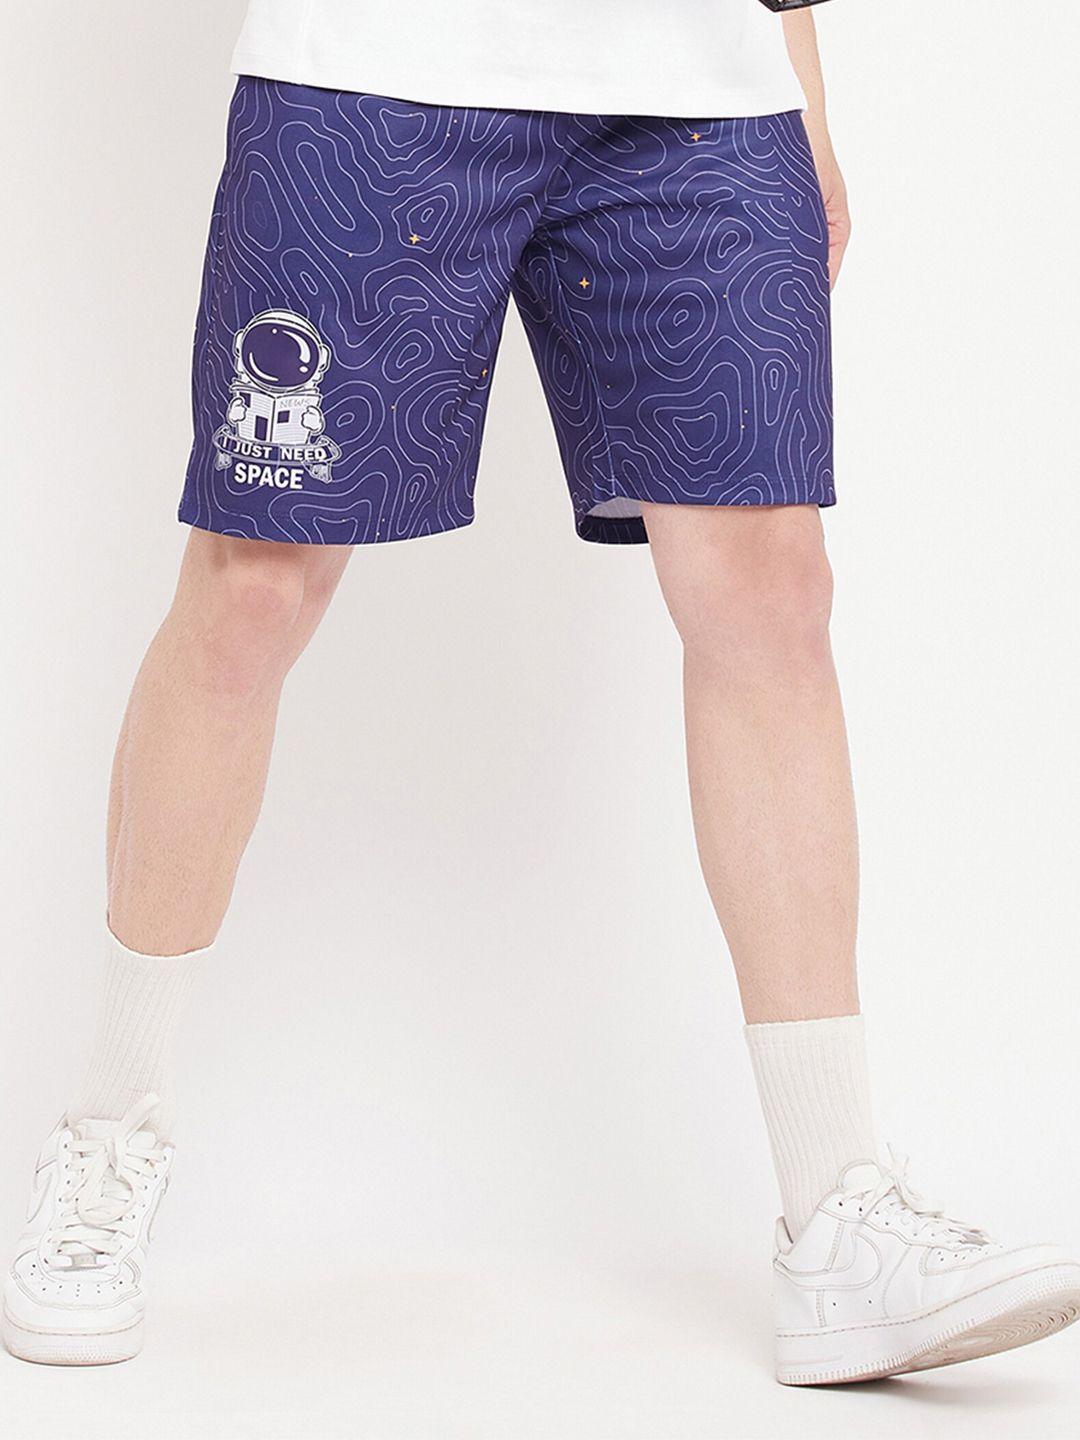 edrio loose fit mid-rise conversational printed technology cotton shorts